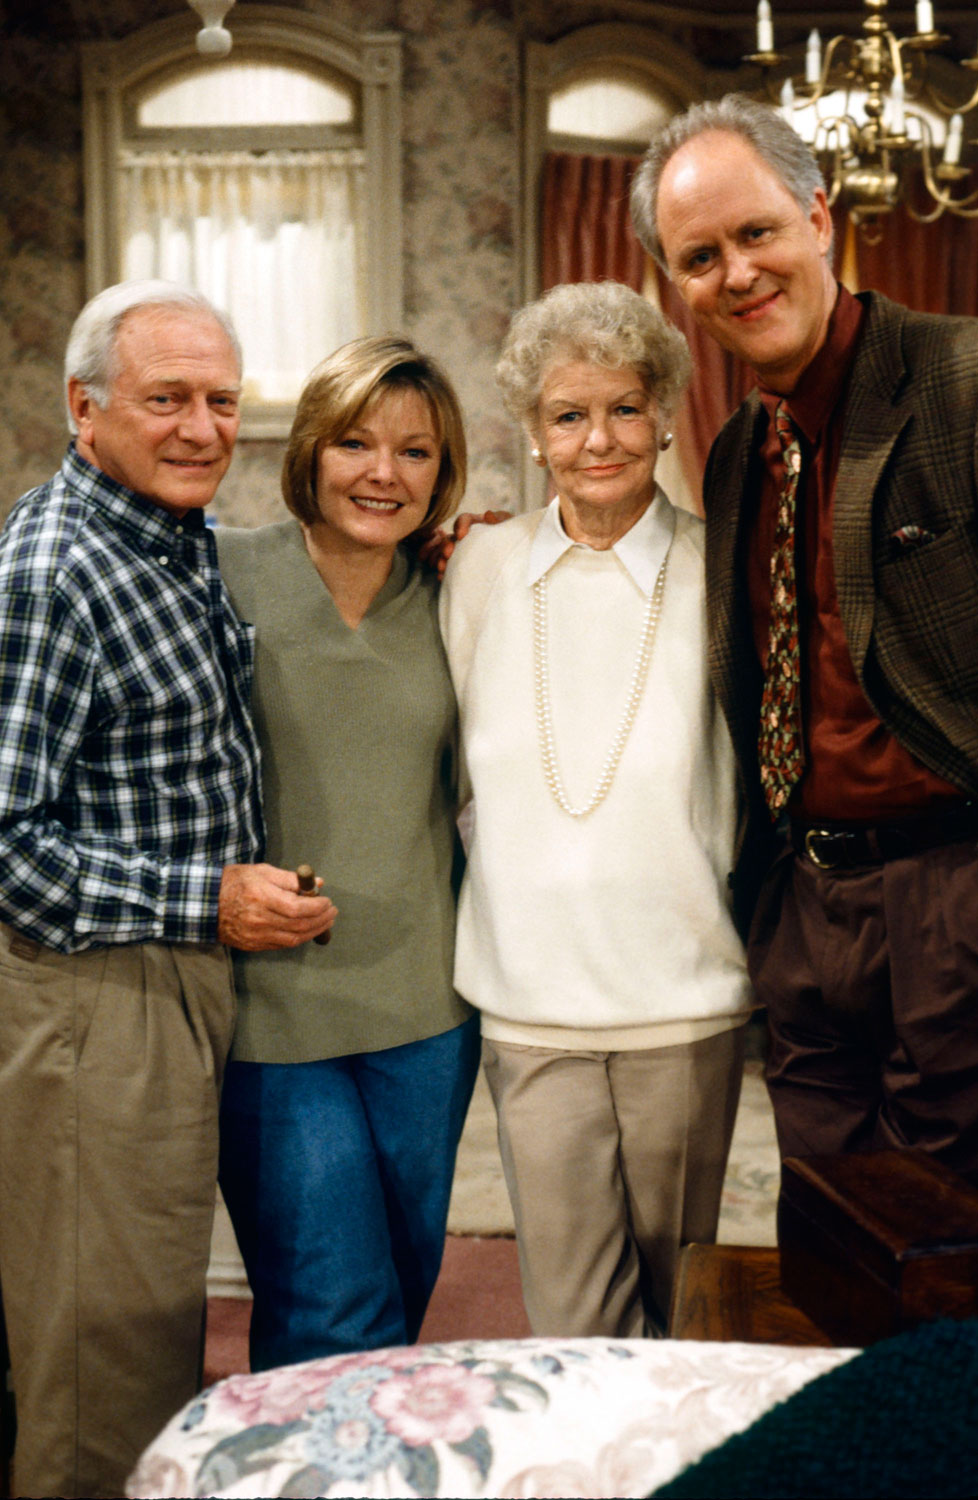 George Grizzard as George Albright, Elaine Stritch as Martha Albright, Jane Curtin as Dr. Mary Albright and John Lithgow as Dr. Dick Solomon in 3rd Rock From The Sun.